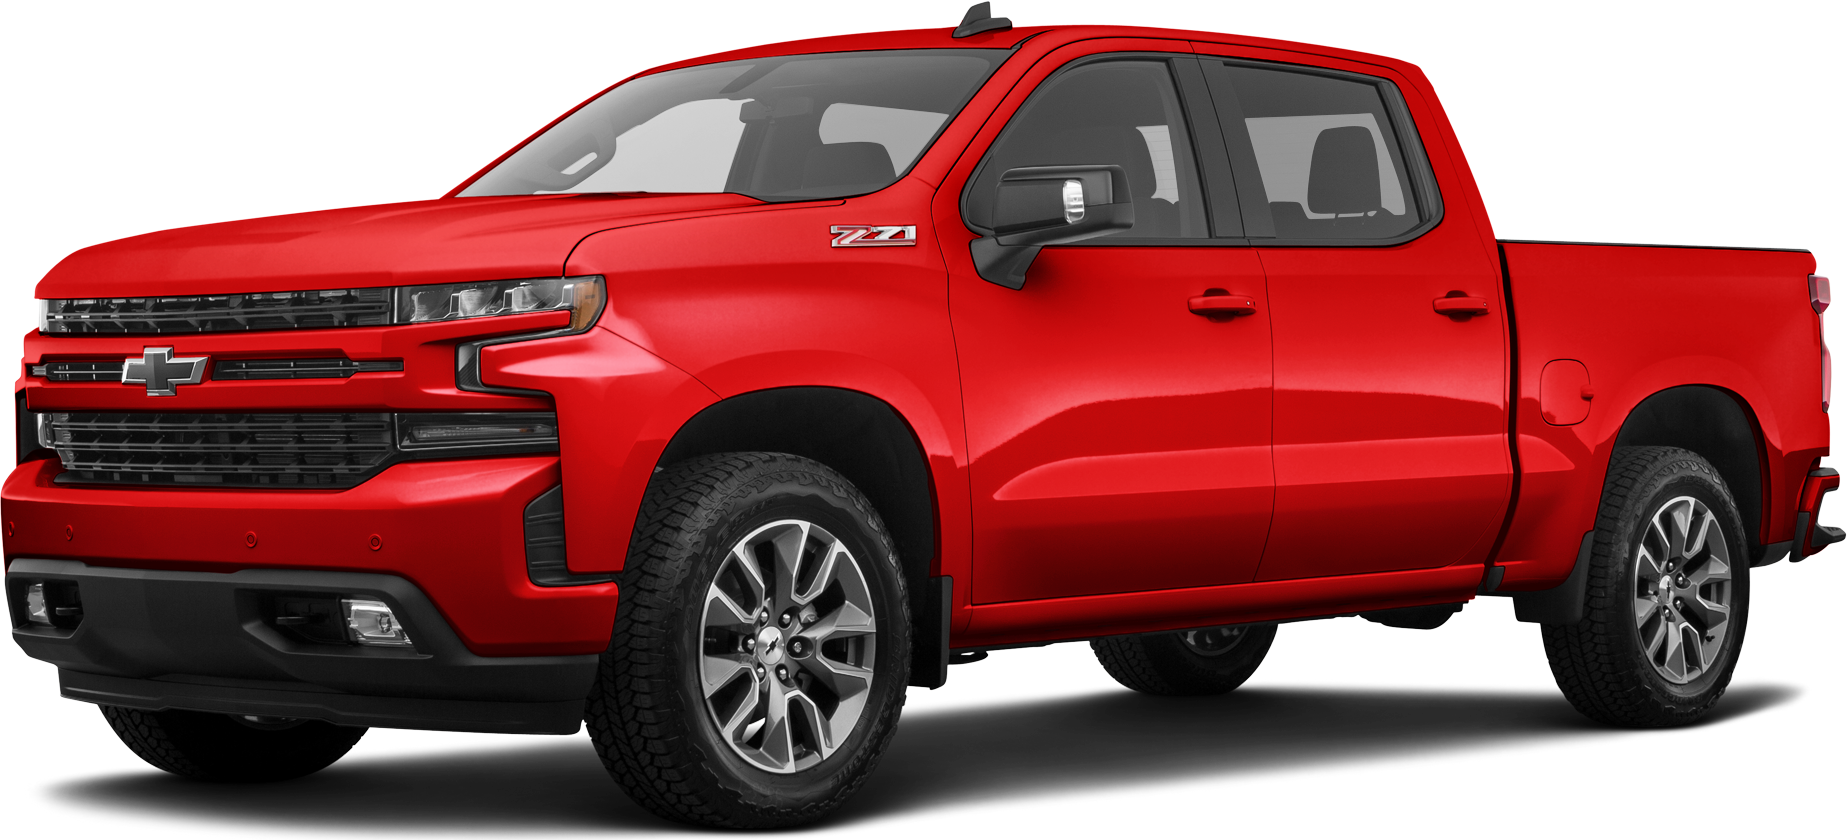 2019 Chevy Silverado 1500 Values And Cars For Sale Kelley Blue Book